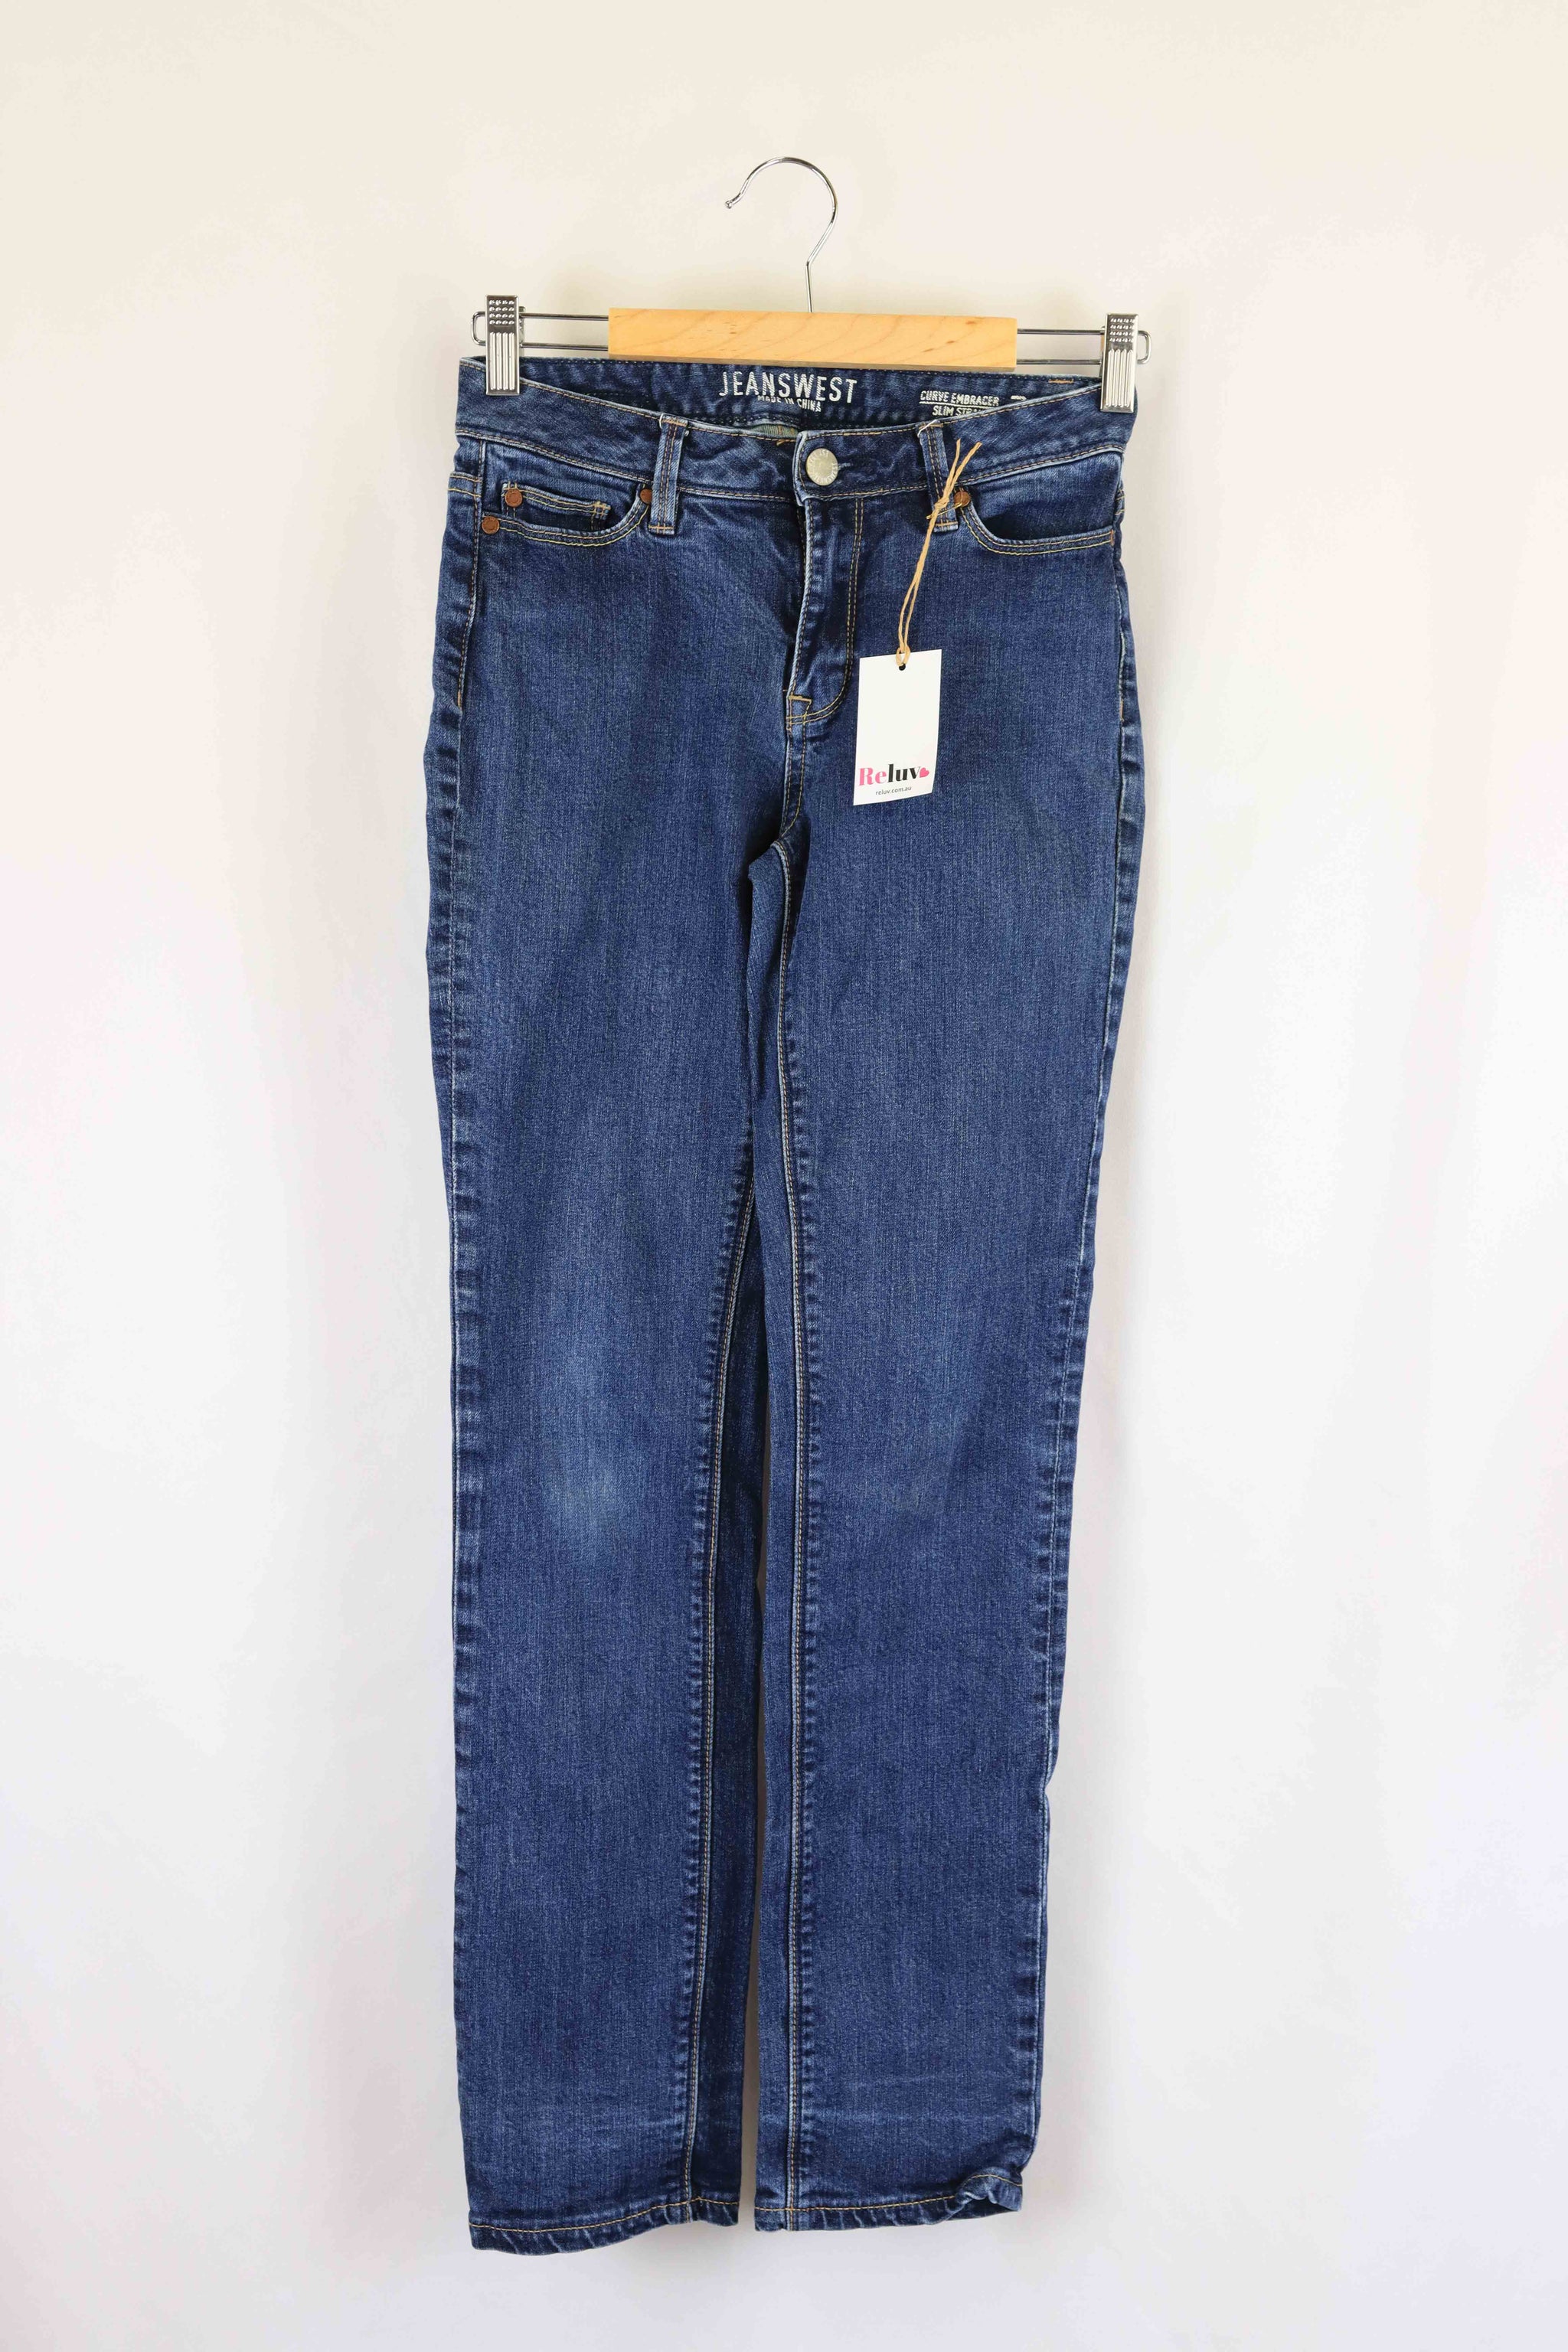 Jeanswest Blue Jeans 7 - Reluv Clothing Australia